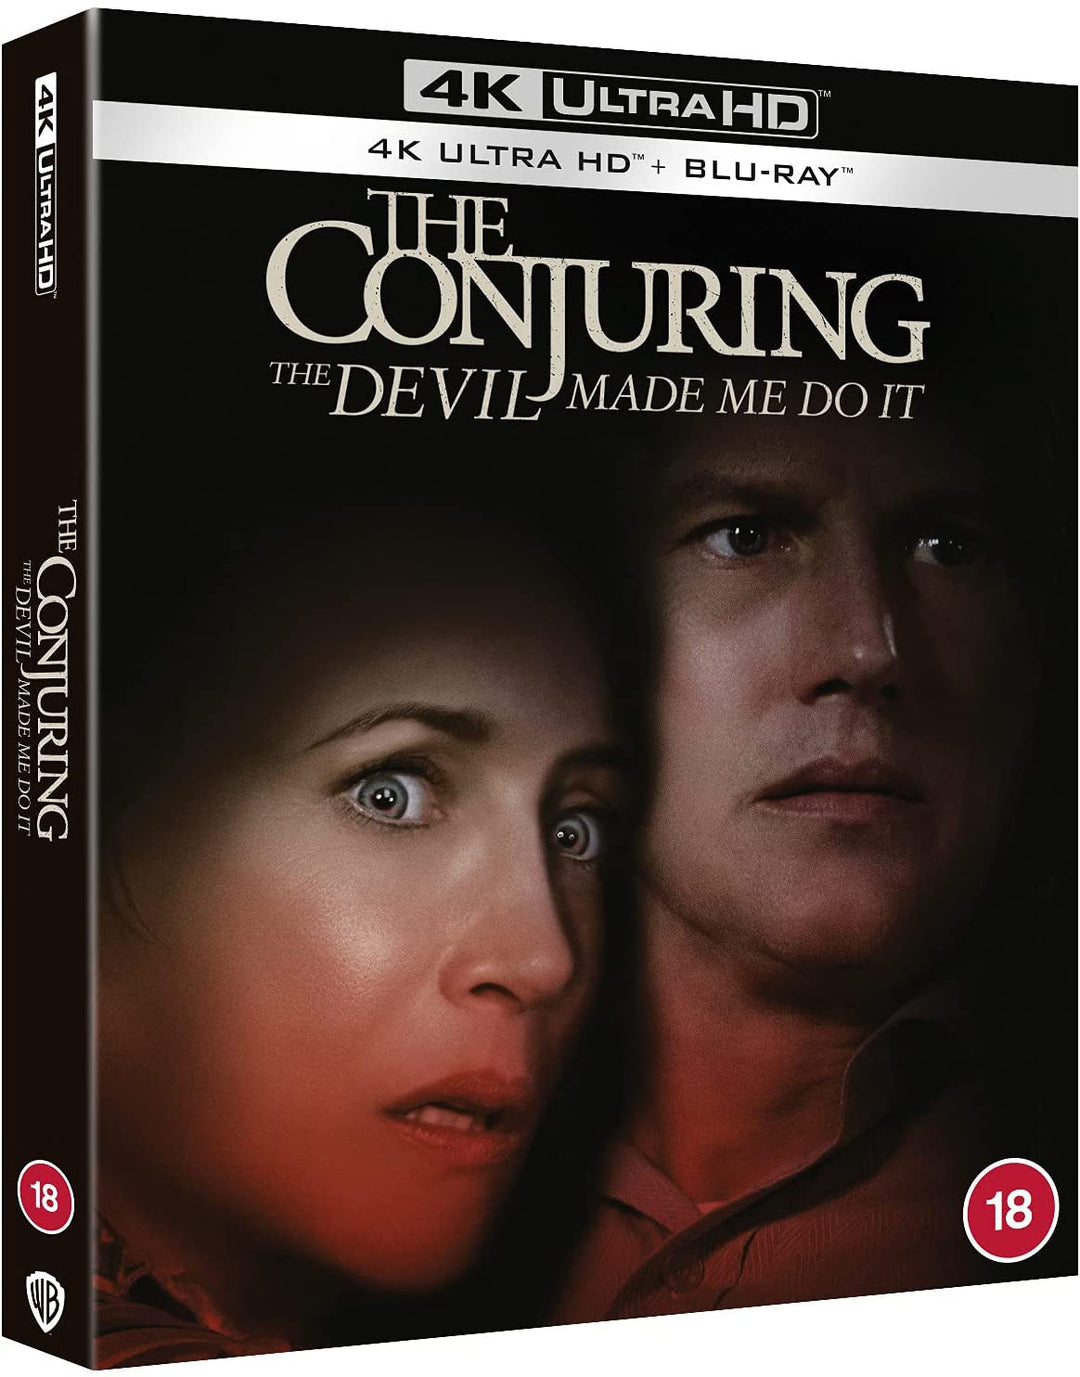 The Conjuring: The Devil Made Me Do It [4K Ultra HD] [2021] [Region Free] – Horror/Thriller [BLu-ray]